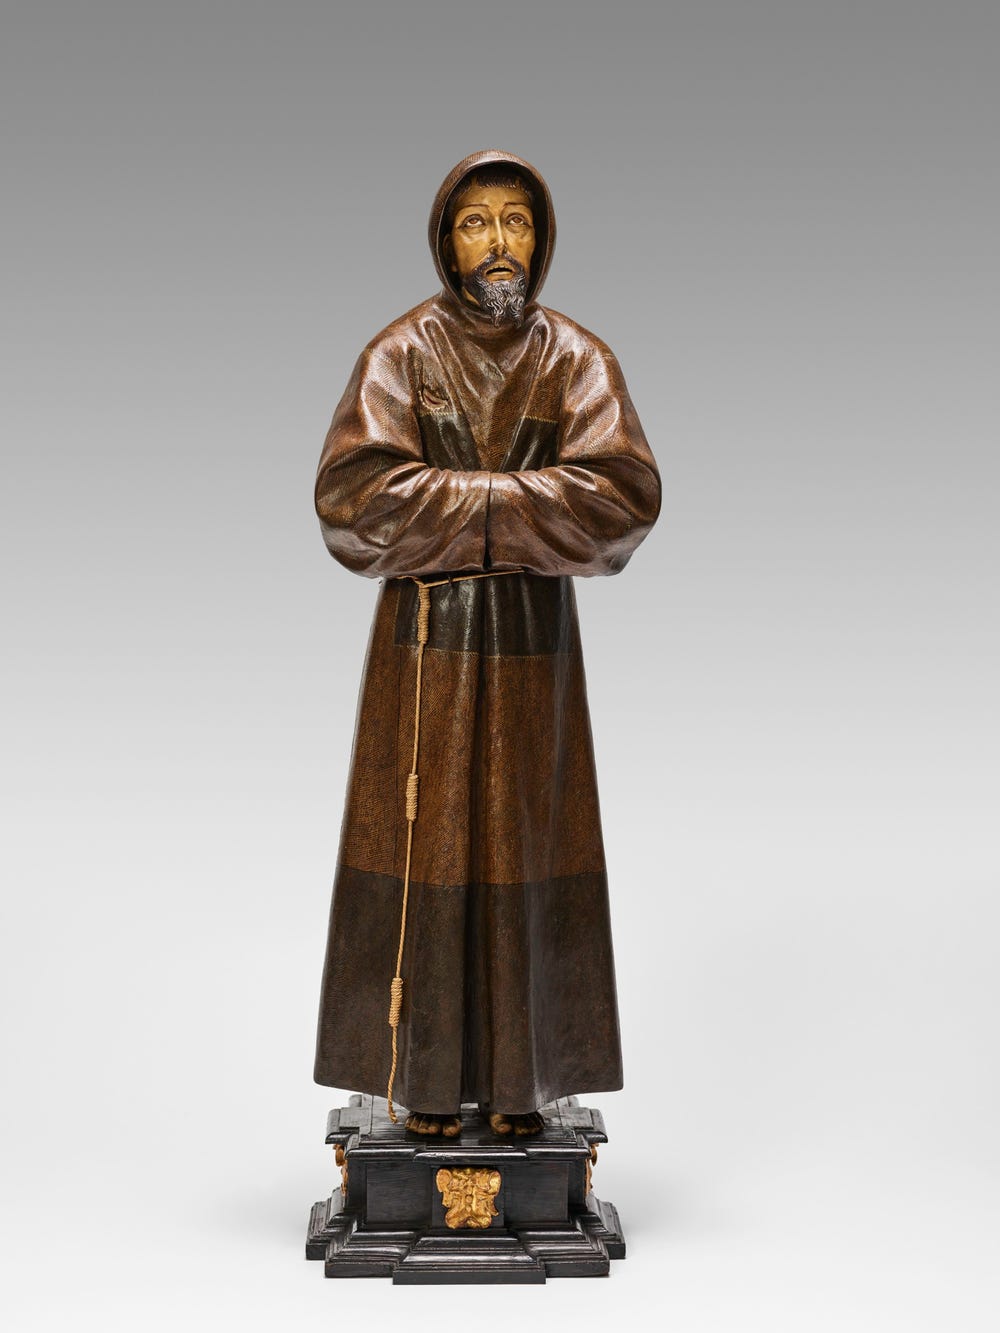 sculpture of a man in a robe with his sleeves together, looking up